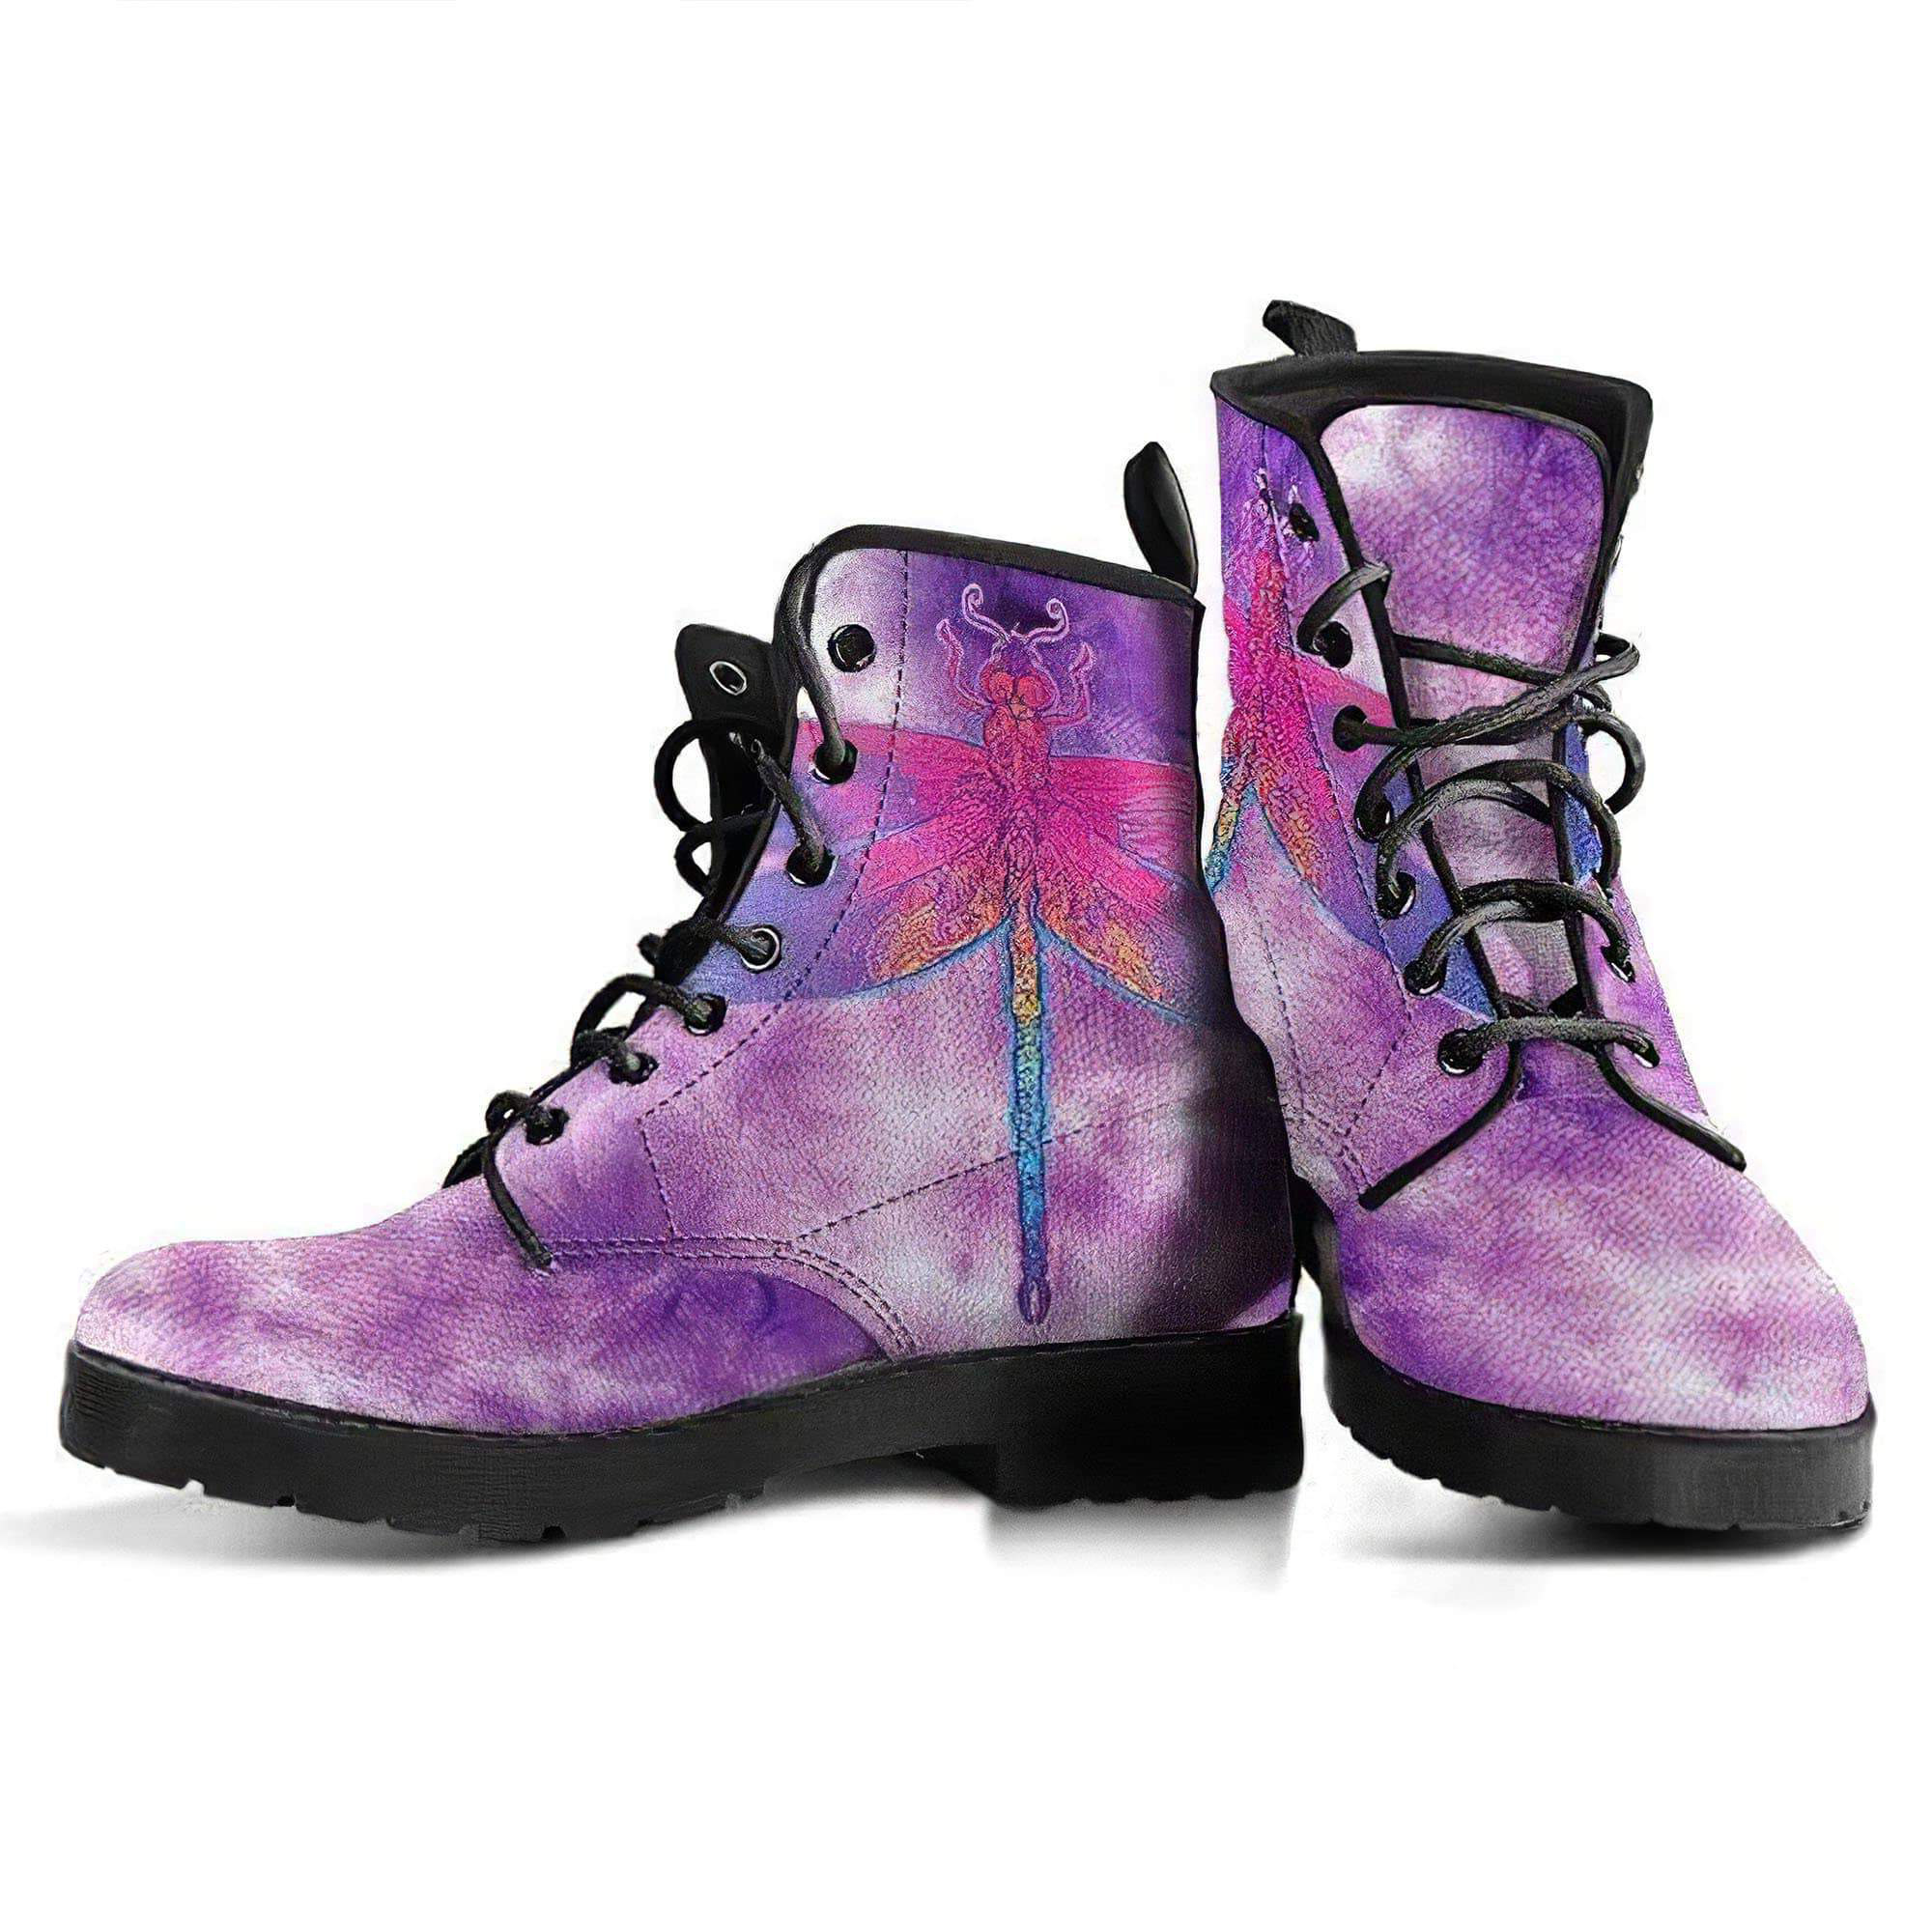 tiedye-dragonfly-3-handcrafted-boots-women-s-leather-boots-12051965149245.jpg